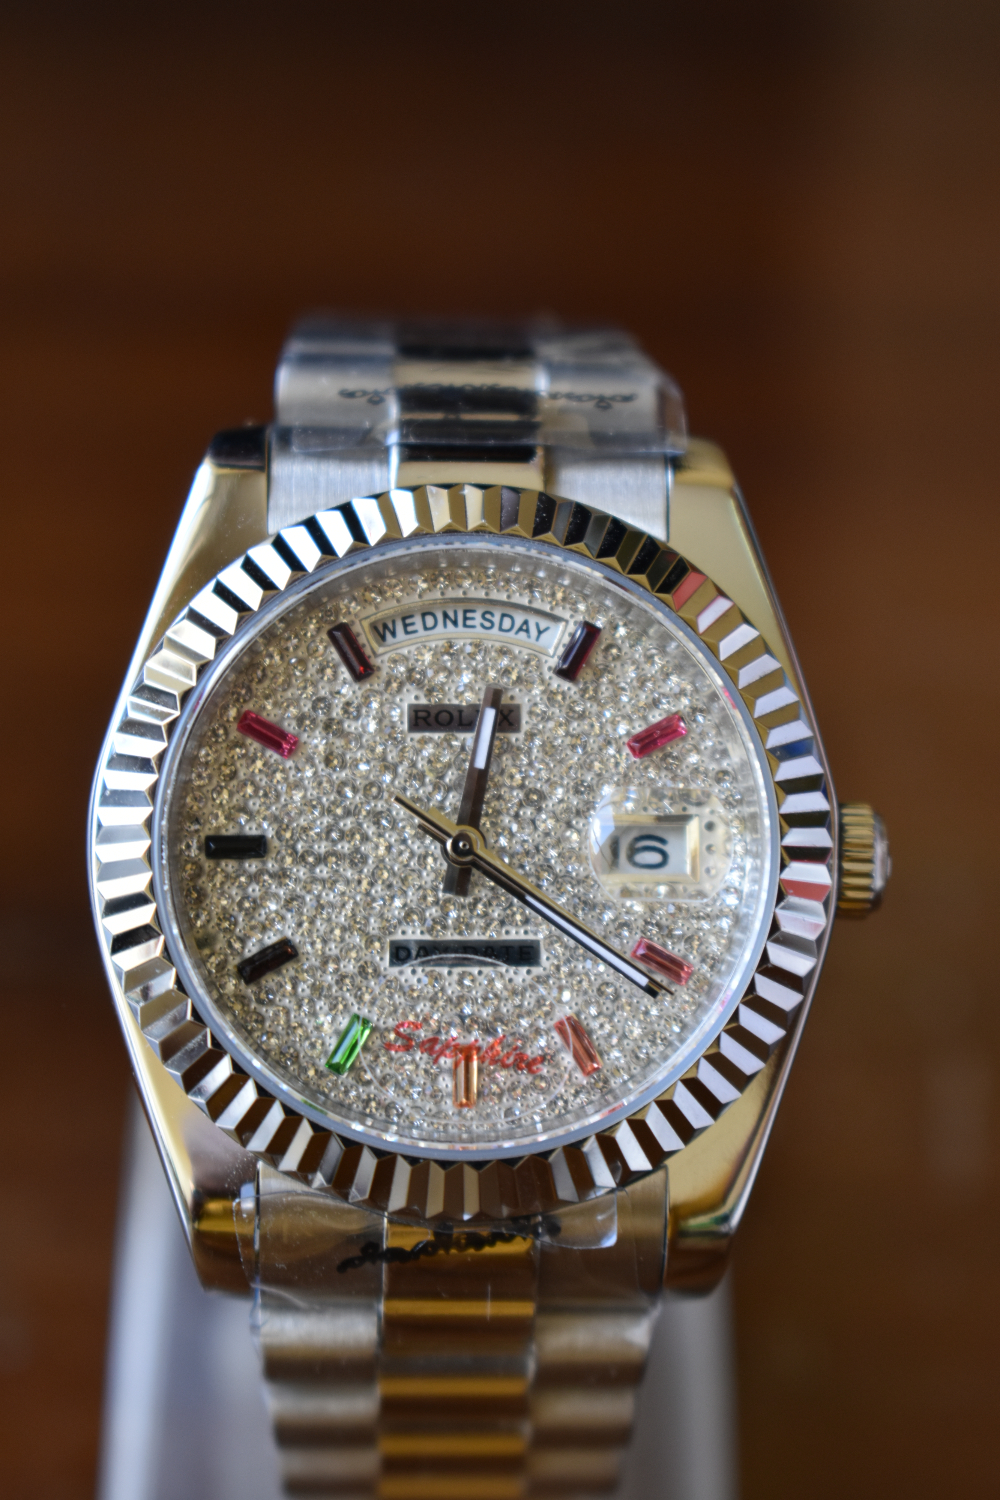 Rolex Day-Date Rainbow Pave Diamond Dial stainless steel President watch 128239 for sale in Nairobi,Kenya.